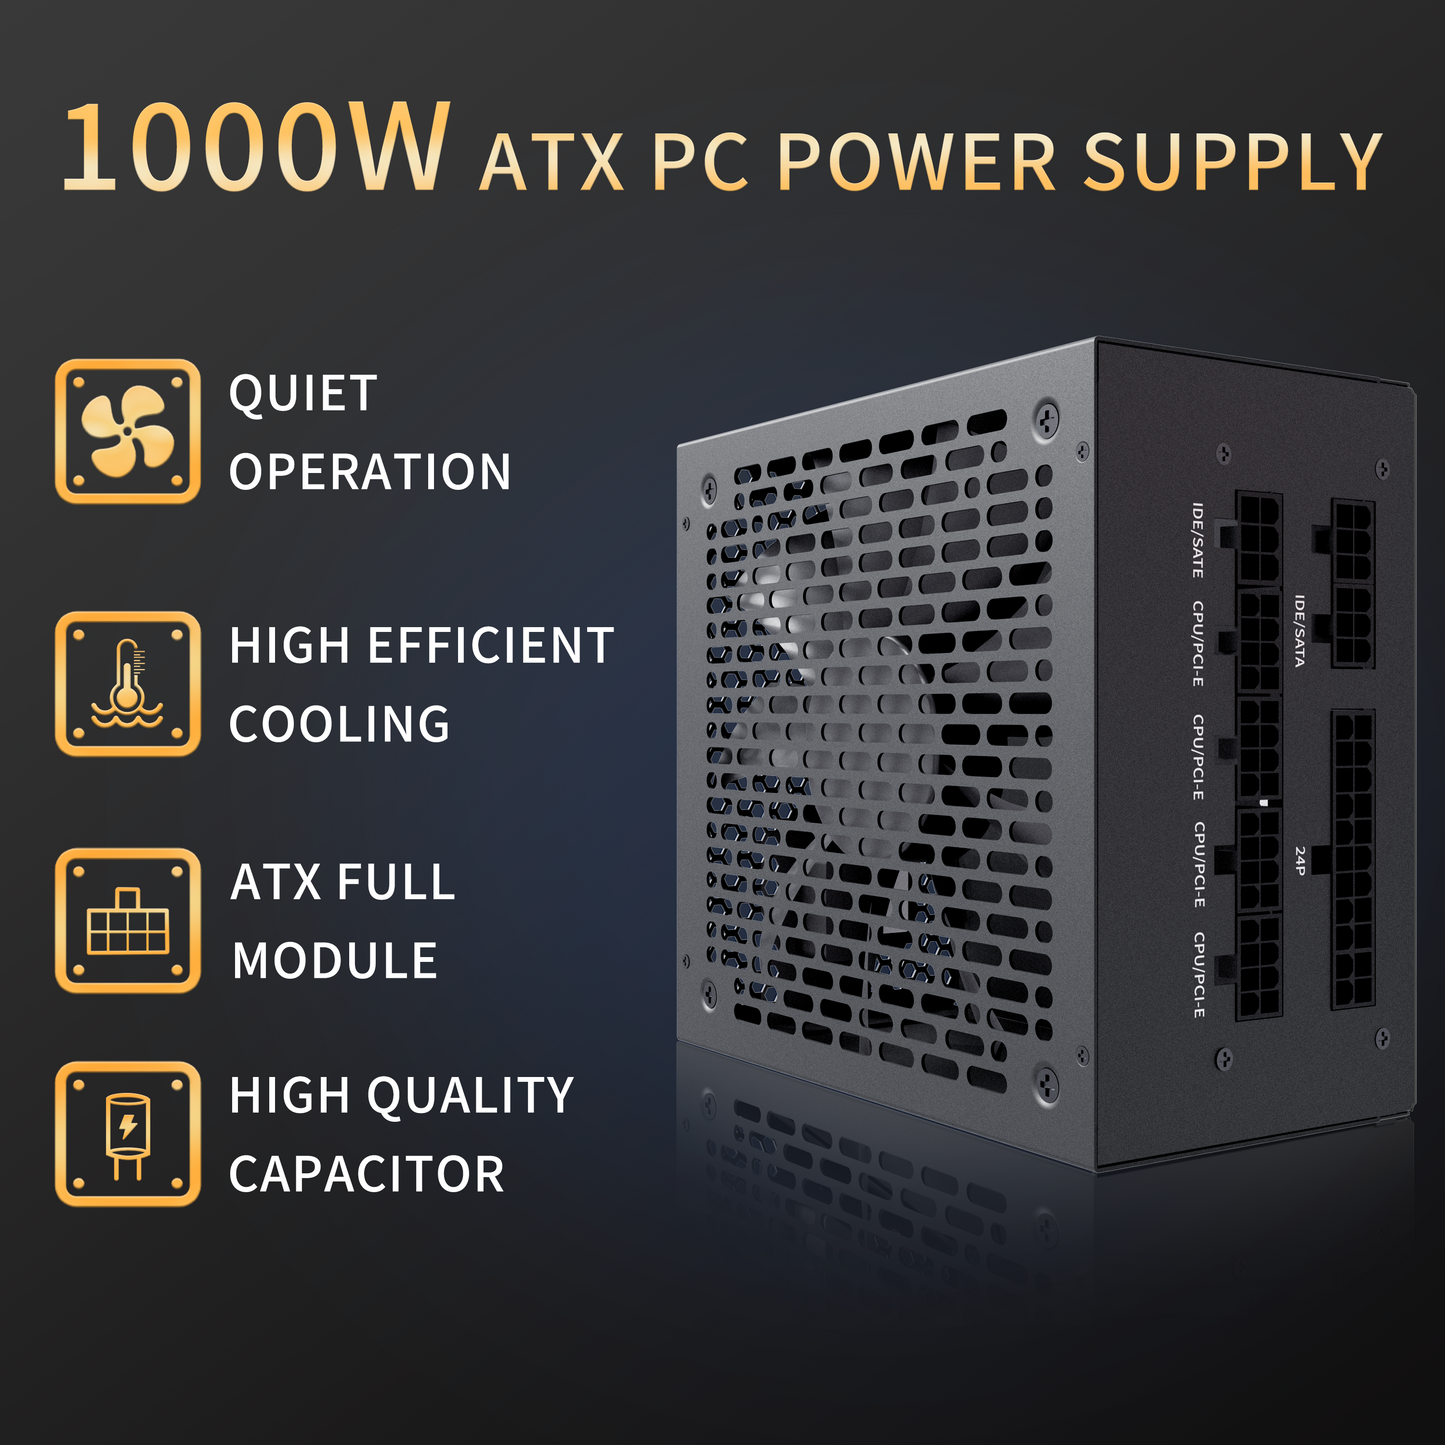 MUSETEX Power Supply 1000W, Full Modular ATX Computer Power Supplies, Multi Connectors, 140mm Ultra Quiet Cooling Fan, PC PSU, Black (MU1000)-Supported in US only